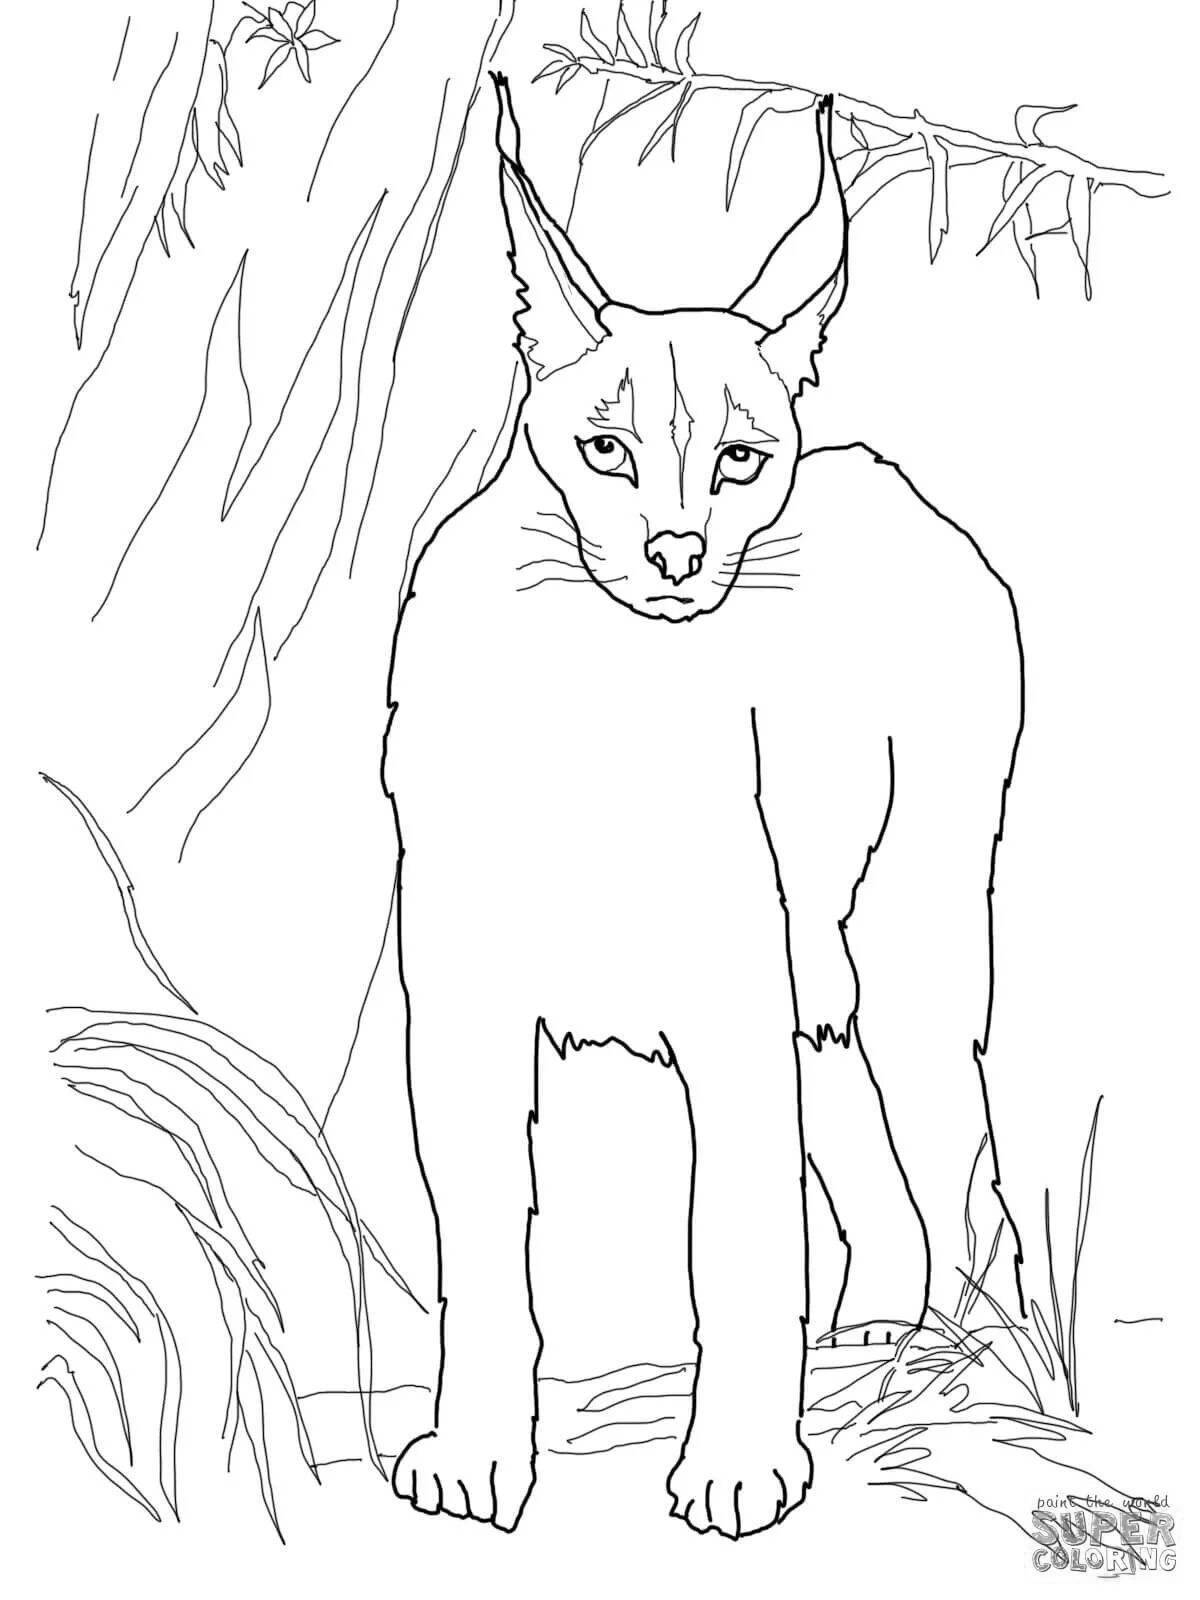 Distinctive caracal coloring page